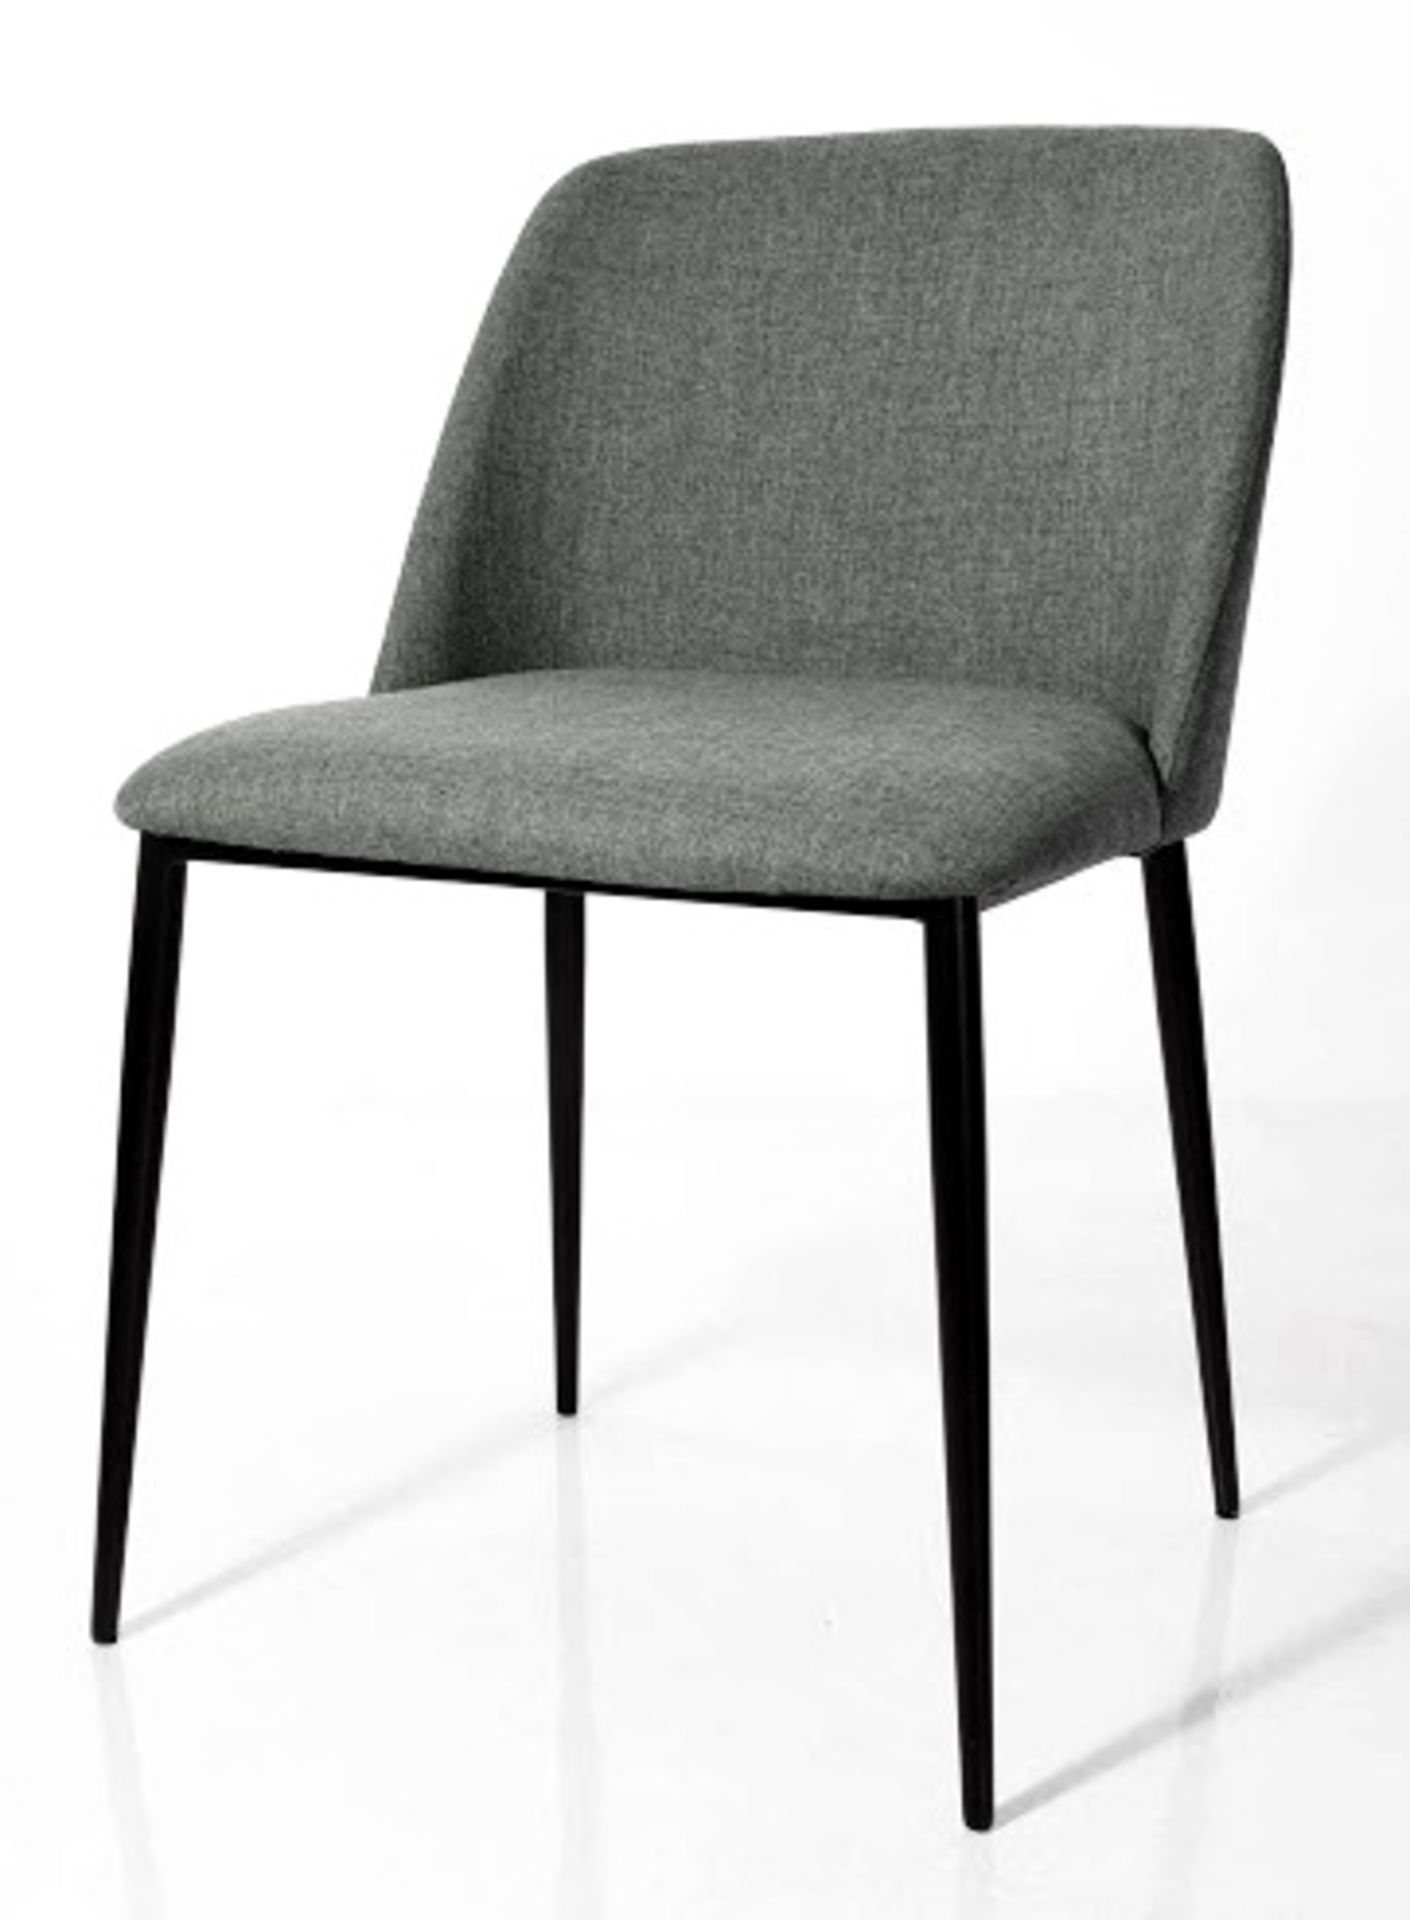 6 x FLANDERS Upholstered Contemporary Dining Chairs In Grey Fabric, With Slender Black Metal - Image 2 of 3